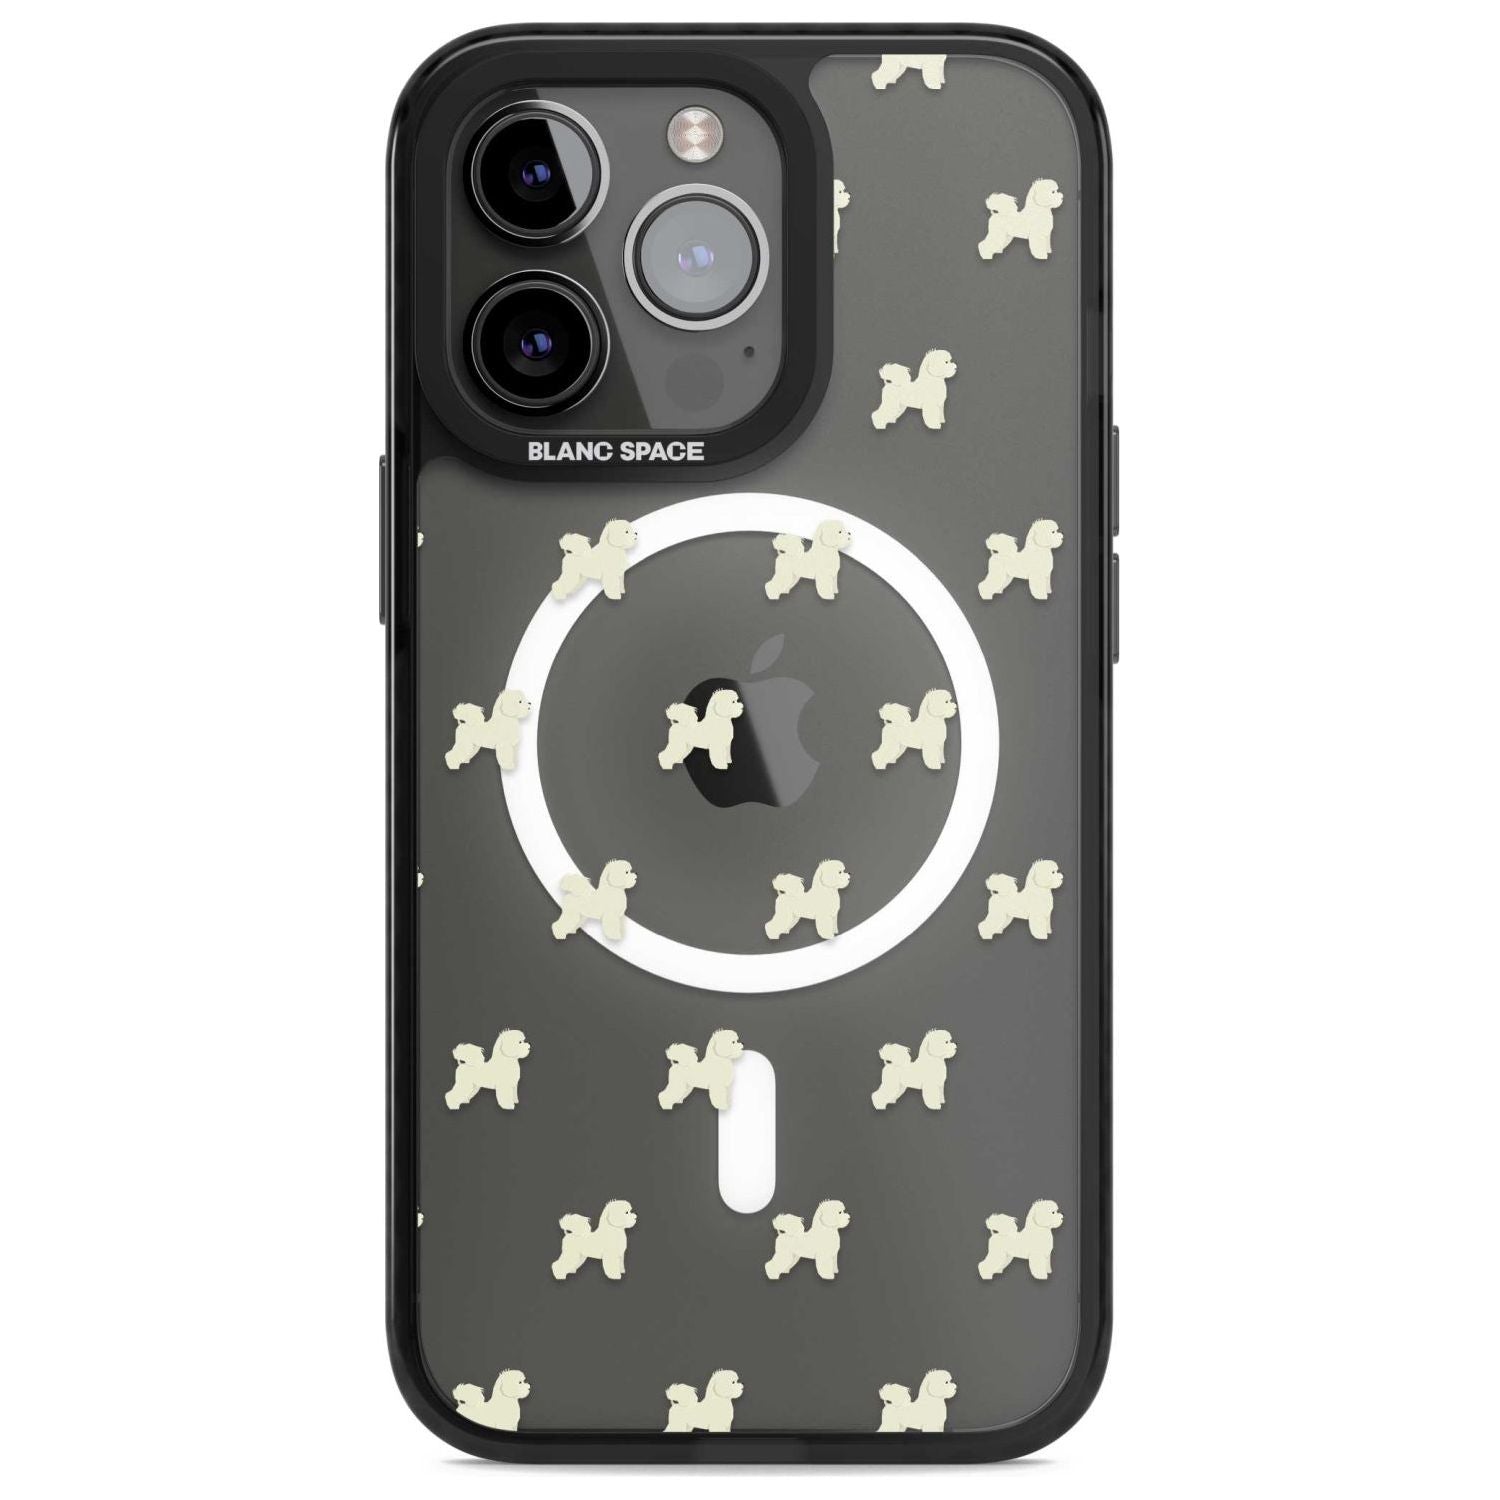 Bichon Frise Dog Pattern Clear Phone Case iPhone 15 Pro Max / Magsafe Black Impact Case,iPhone 15 Pro / Magsafe Black Impact Case,iPhone 14 Pro Max / Magsafe Black Impact Case,iPhone 14 Pro / Magsafe Black Impact Case,iPhone 13 Pro / Magsafe Black Impact Case Blanc Space